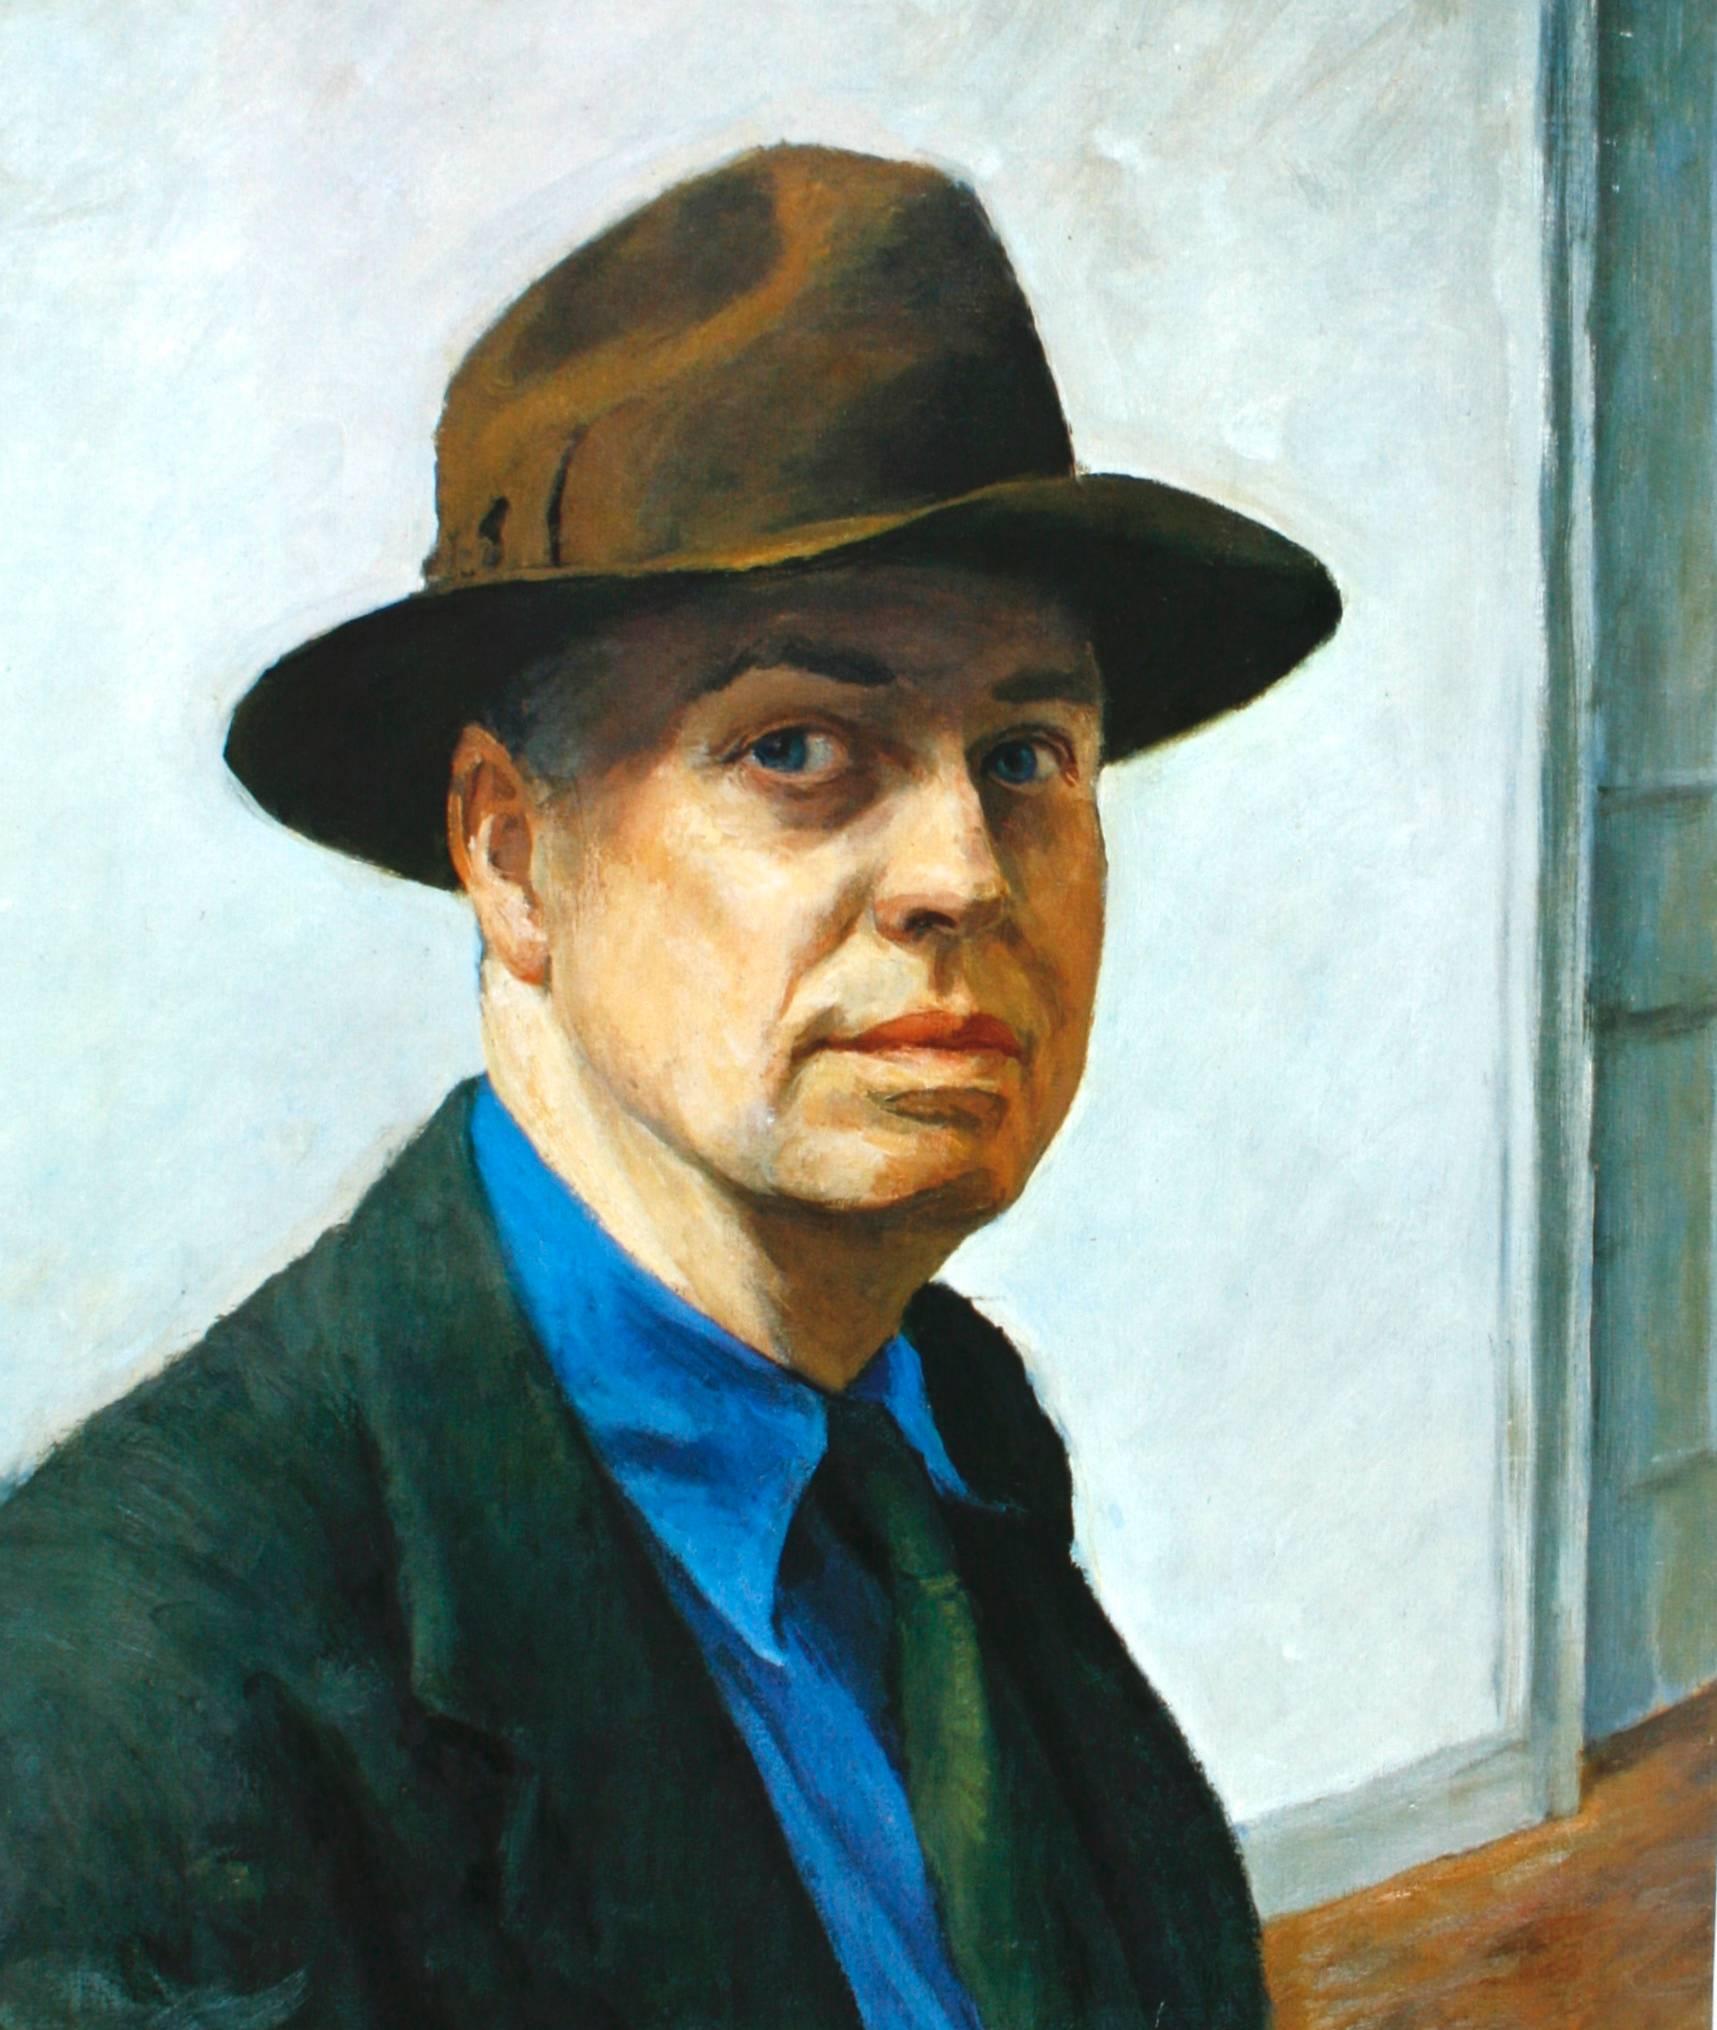 Edward Hopper by Lloyd Goodrich. New York: Harry N. Abrams, Inc. First edition hardcover with no dust jacket, 1971. An oversized art book on the life and work of Edward Hopper. Hopper (1882-1967) was a prominent American artist who painted his